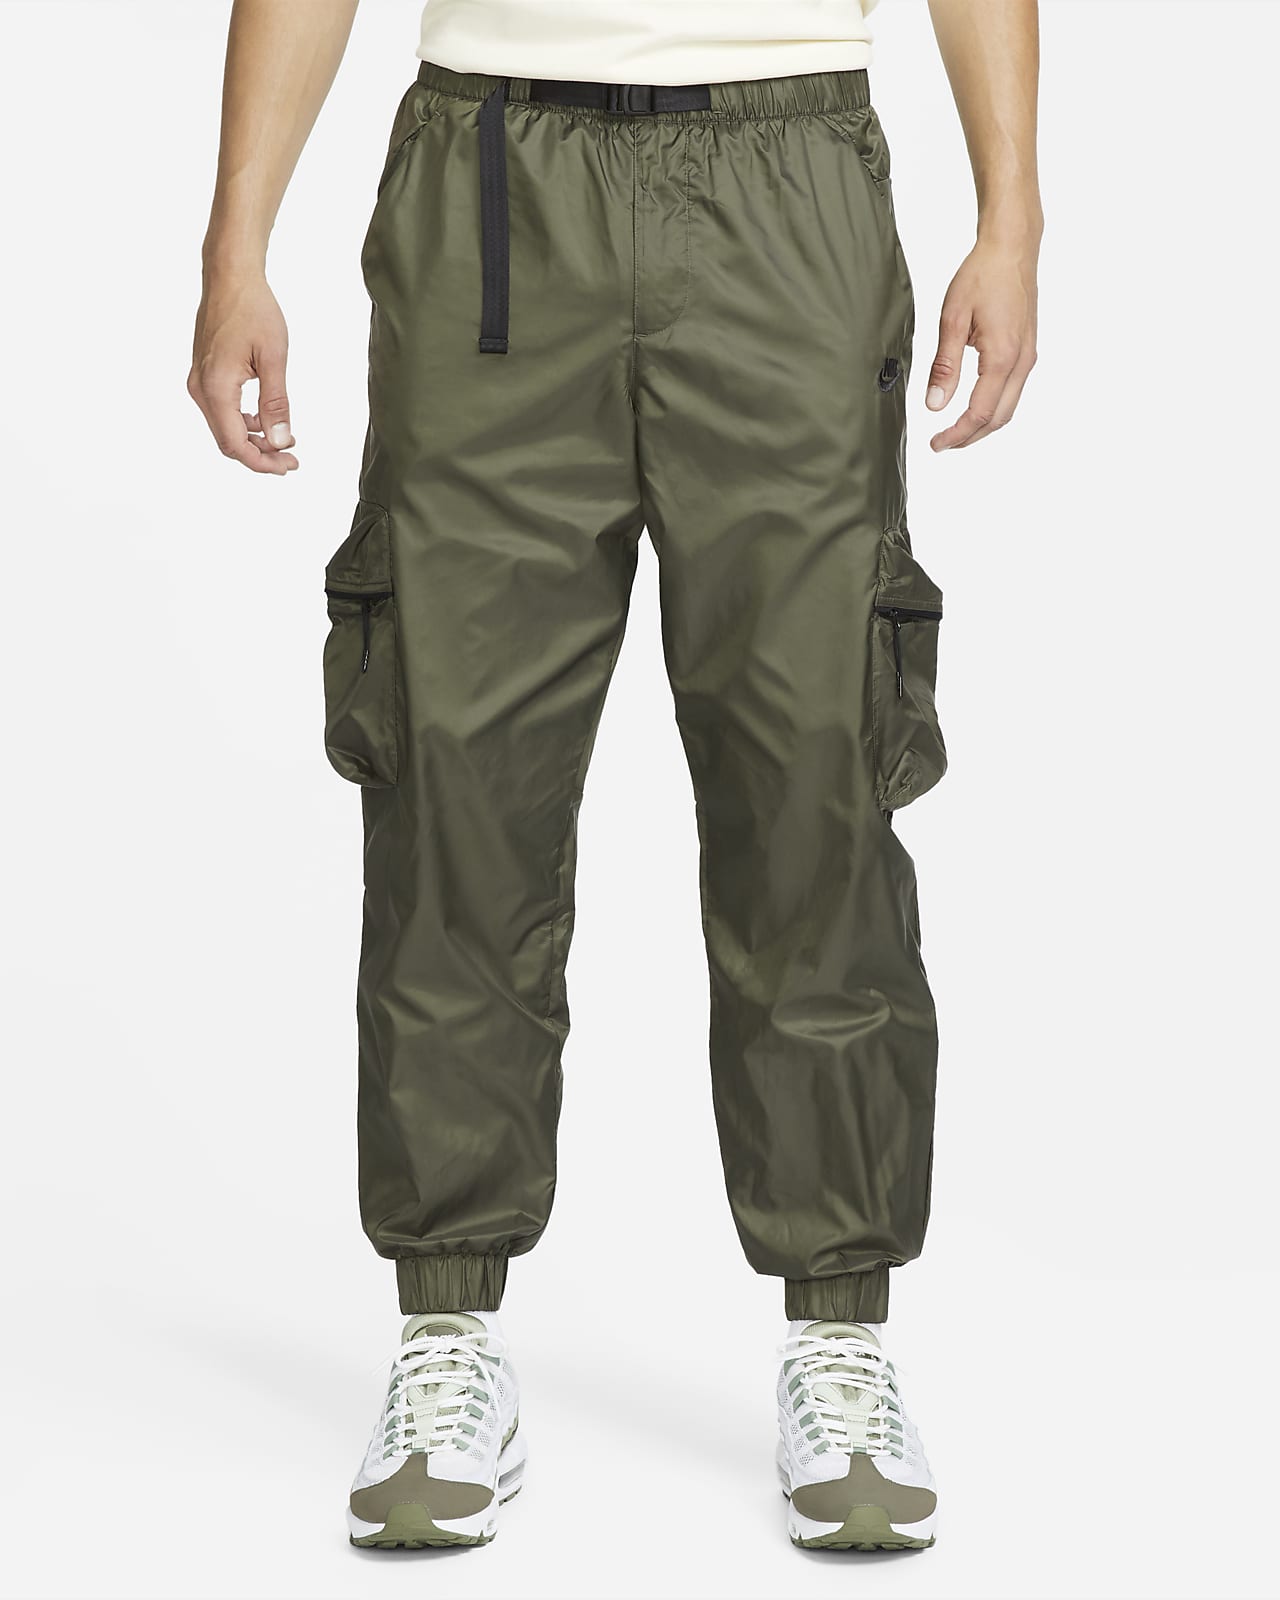 https://static.nike.com/a/images/t_PDP_1280_v1/f_auto,q_auto:eco/cdfeed68-7907-415b-8132-bbae1f2361d4/tech-mens-lined-woven-pants-nLG7ps.png